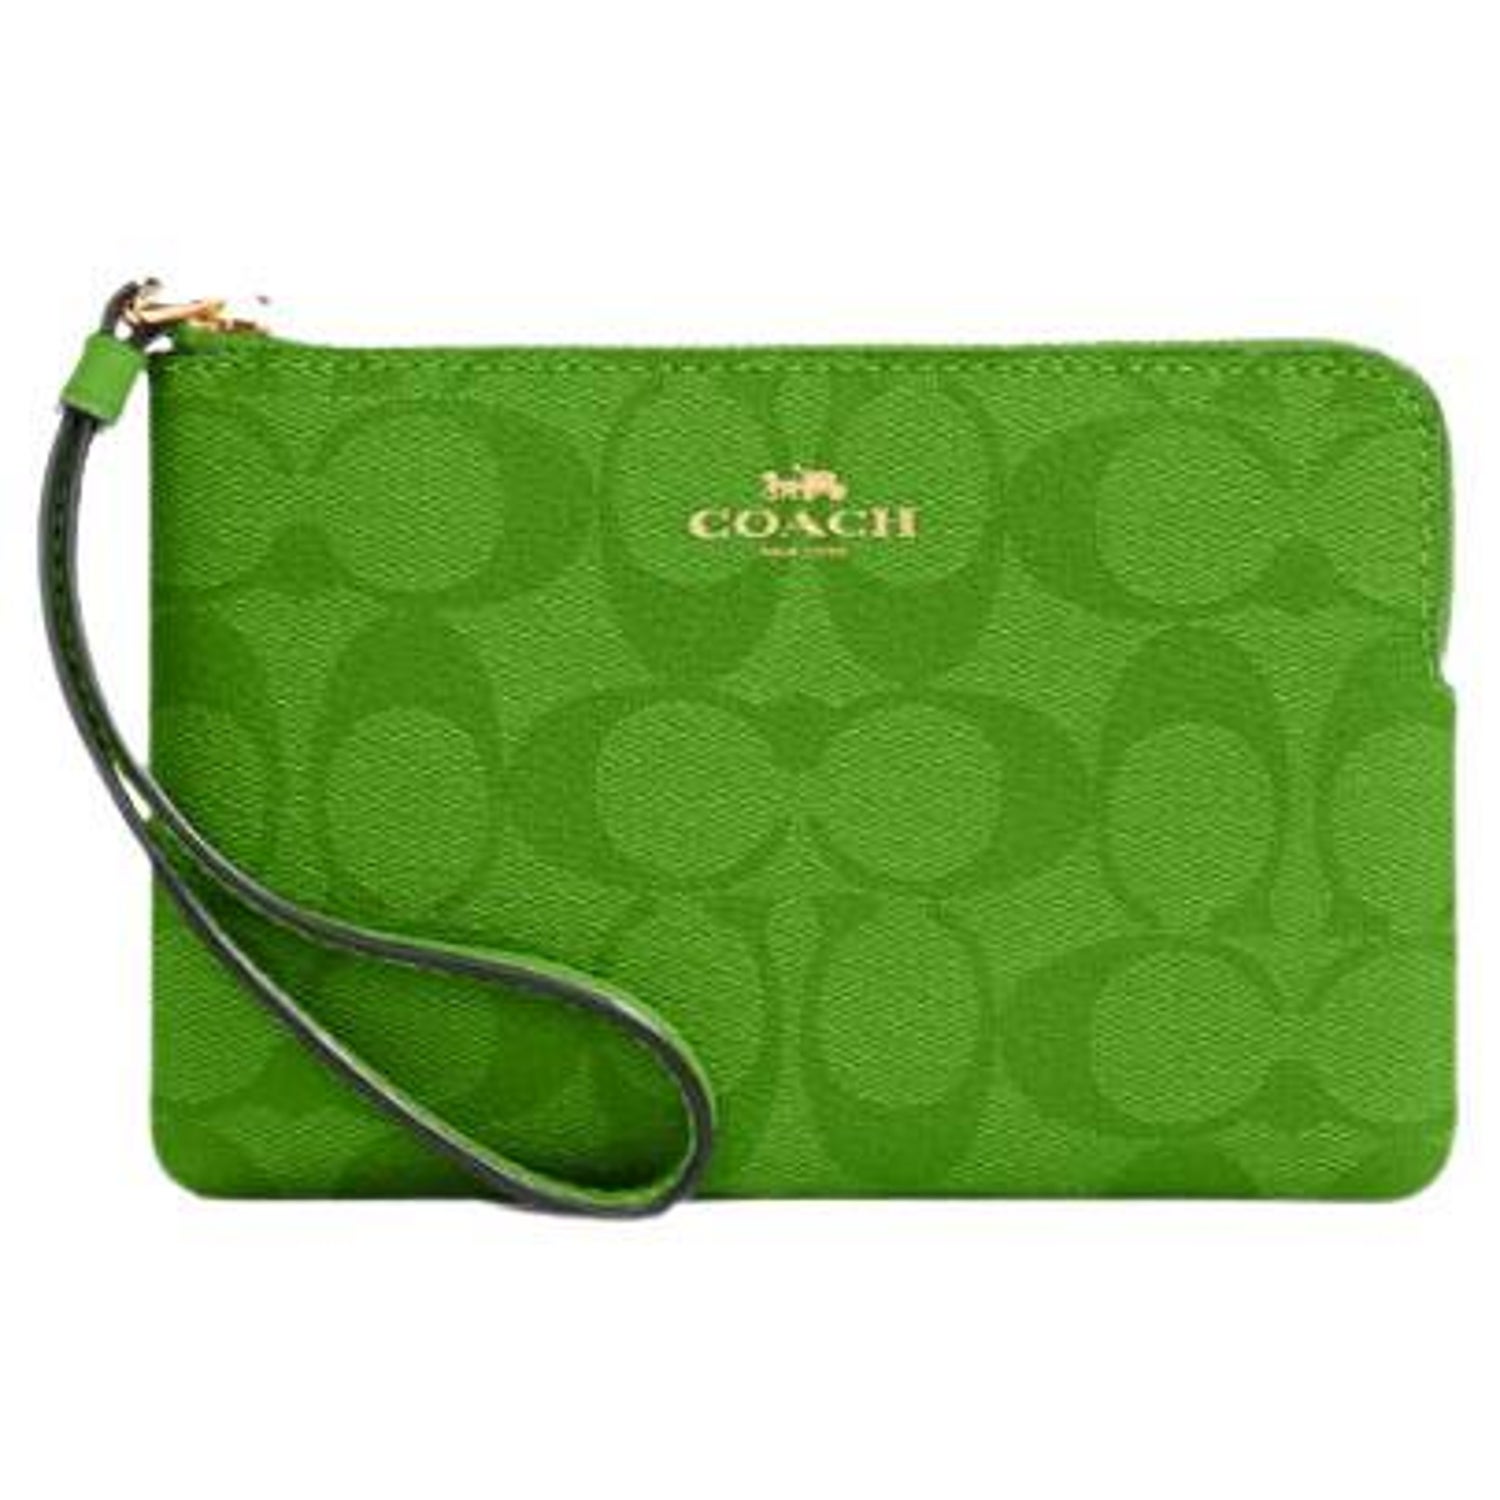 Coach Green Bag - For Sale on 1stDibs